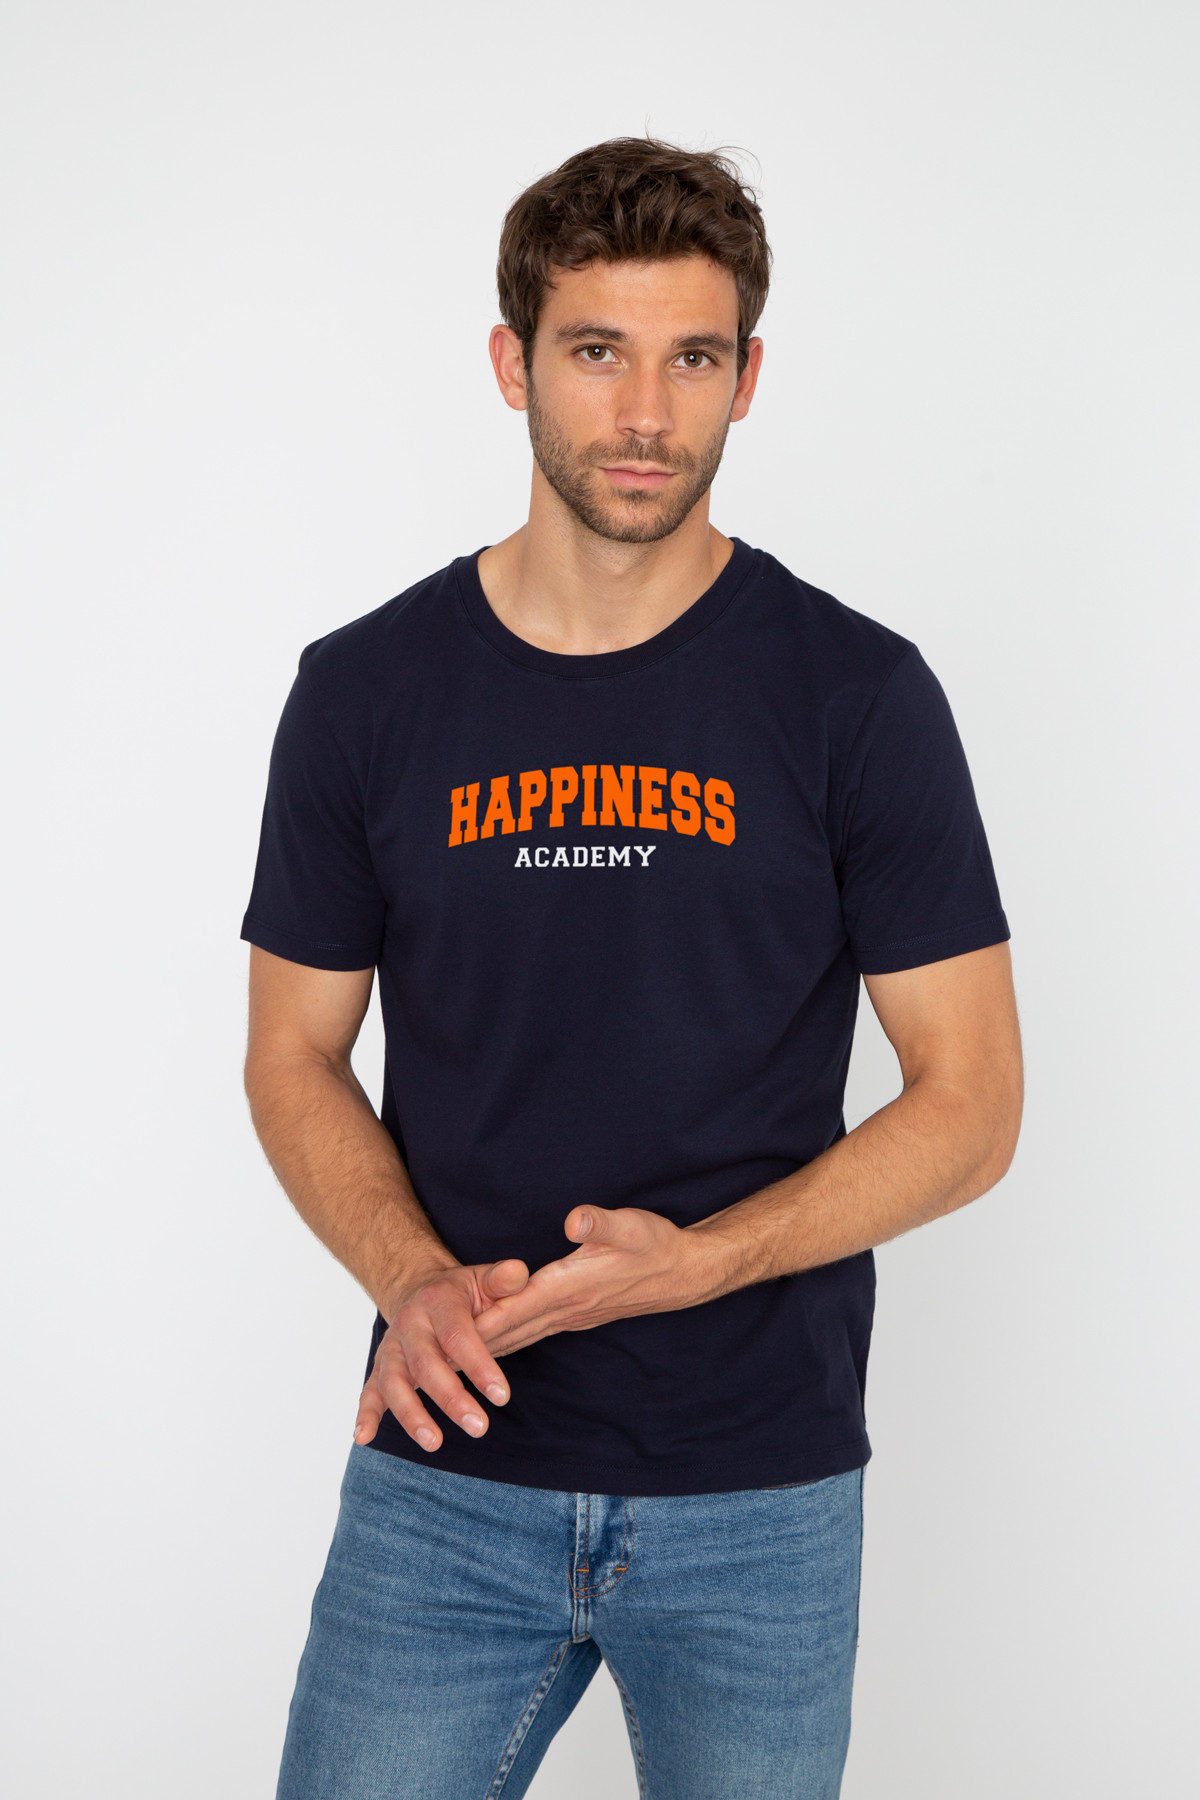 T-shirt HAPPINESS ACADEMY French Disorder